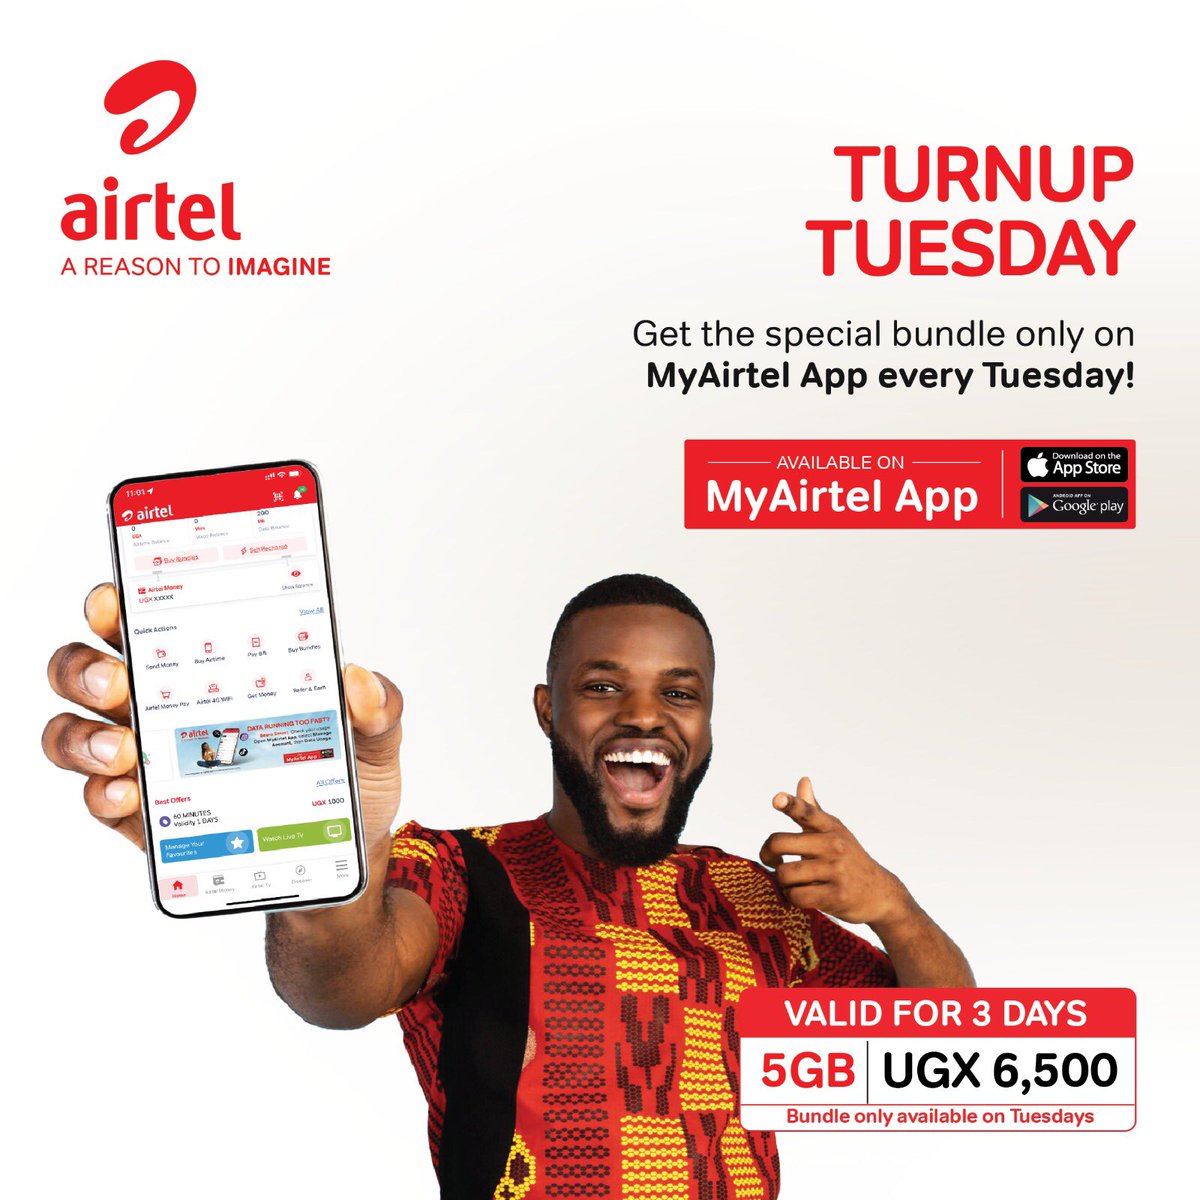 Turn up for yourself & your buddies this Tuesday with the #MyAirtelApp
Use the app to purchase a data bundle worth 5GB at only Ugx 6,500 to take you through the week.
#TurnUpTuesday